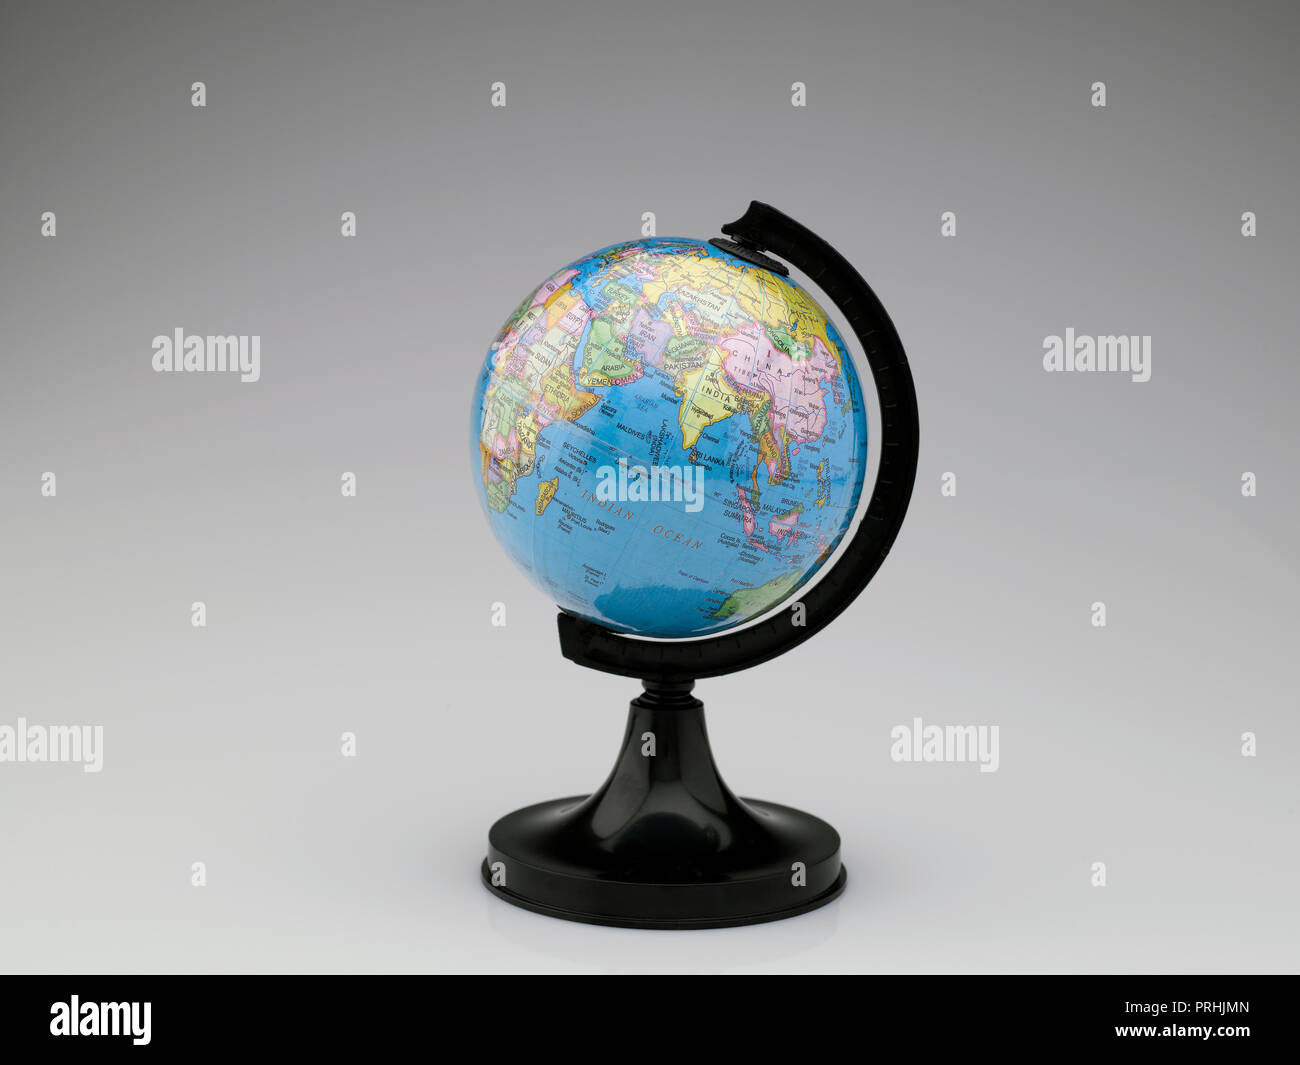 STILL LIFE OF A GLOBE DEPICTING THE EARTH ON A WHITE BACKGROUND Stock Photo